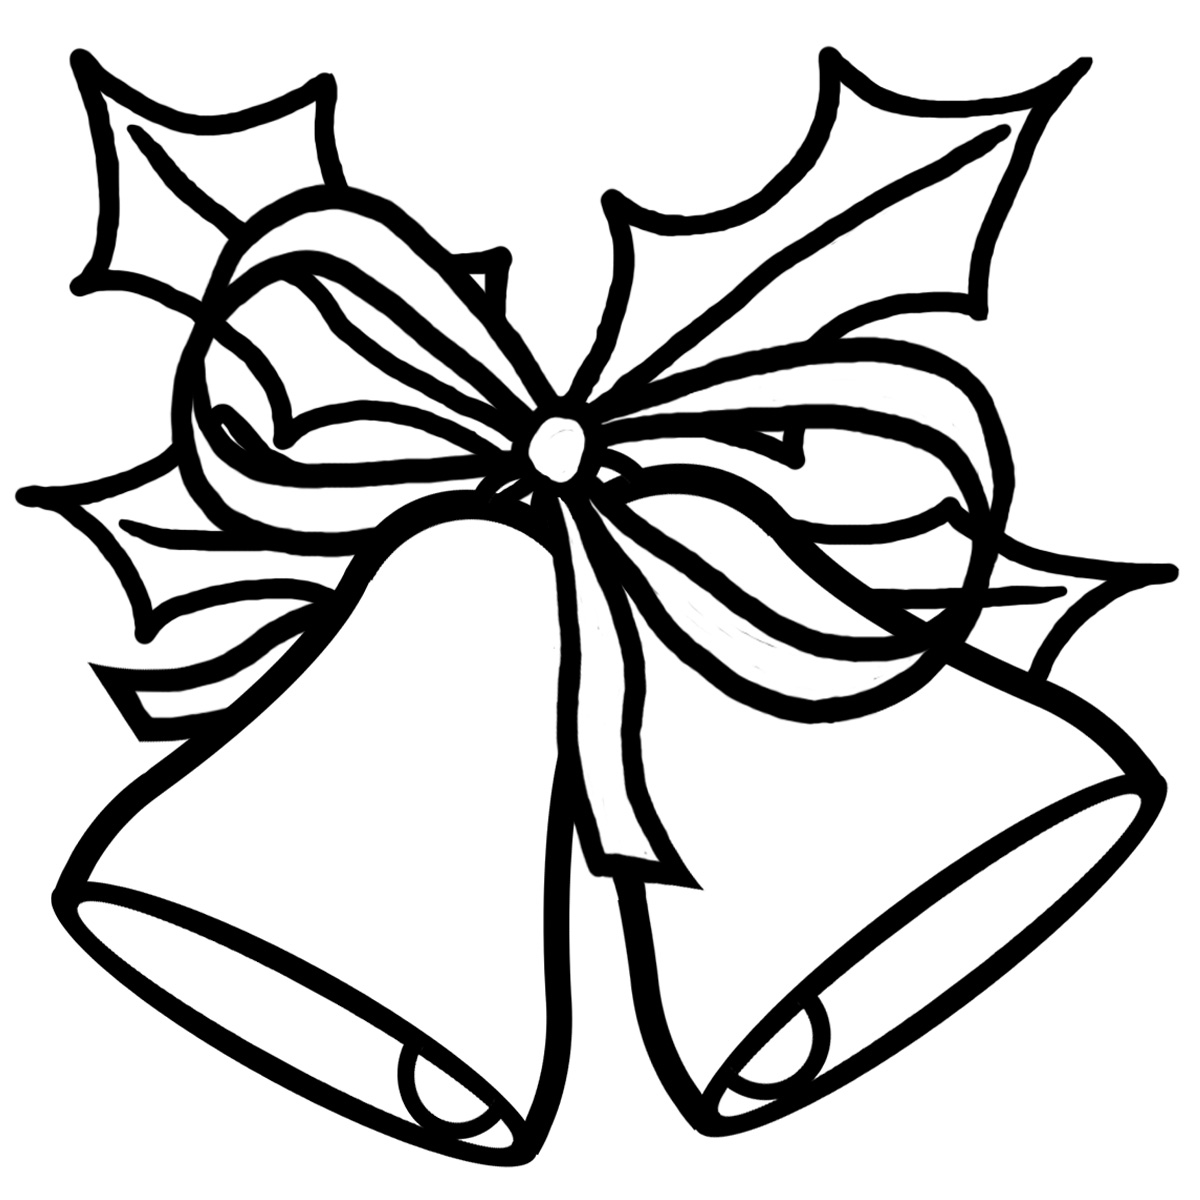 Clip Art Christmas Tree Black And White | Clipart library - Free 